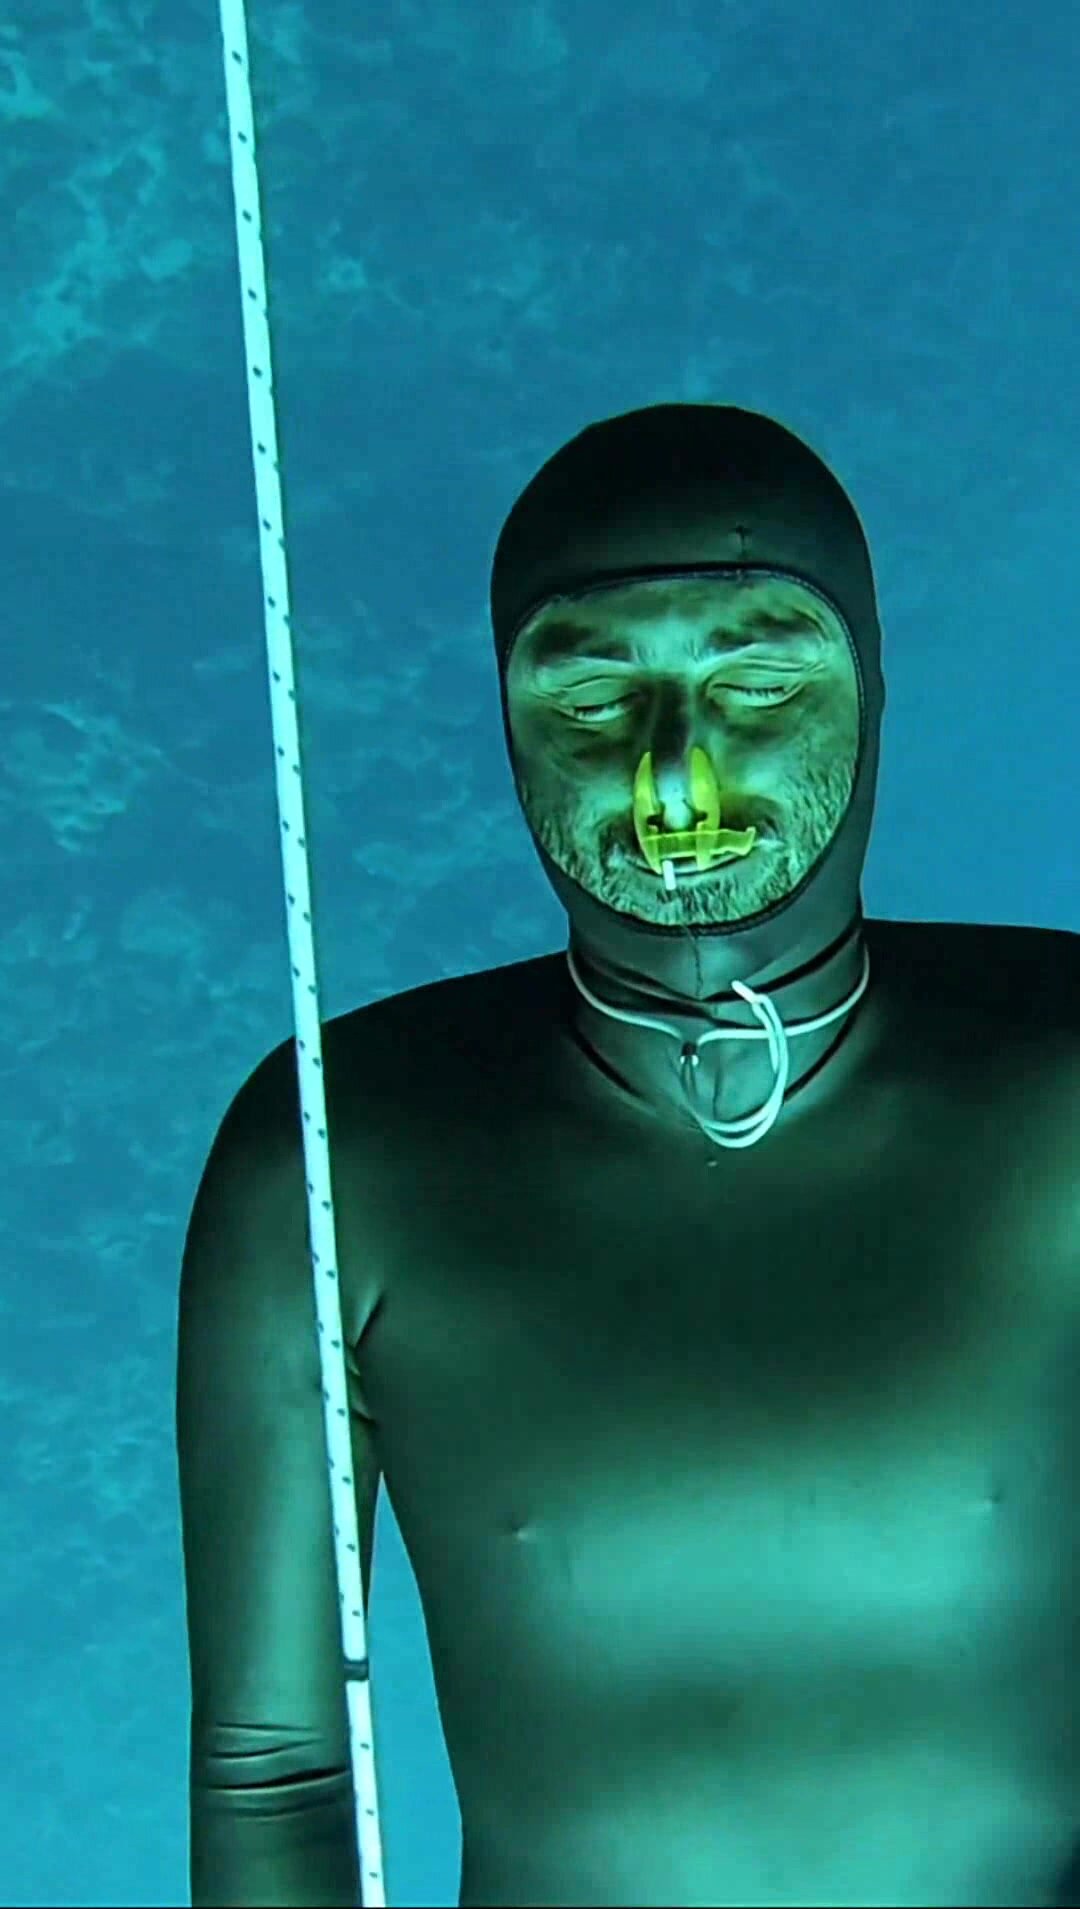 Miguel barefaced underwater in very tight wetsuit